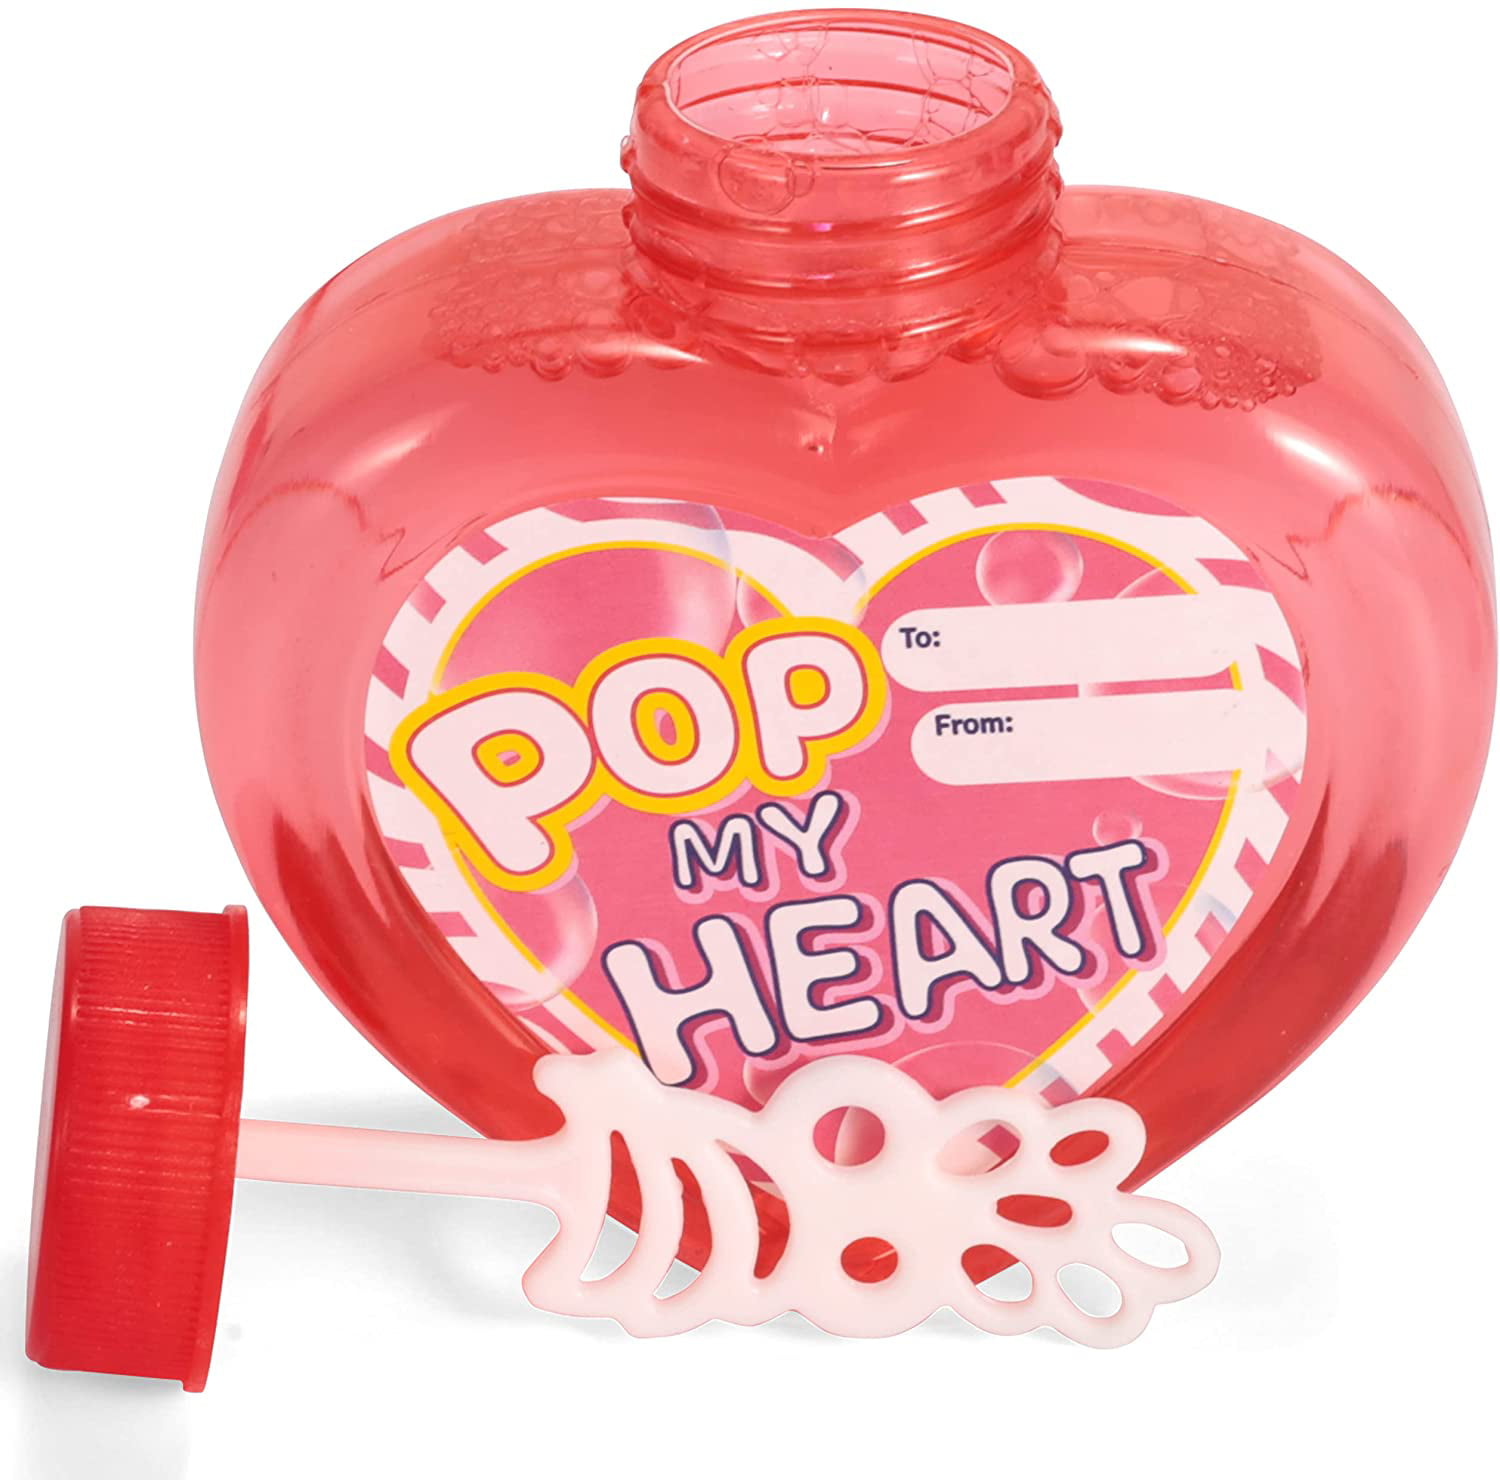 12 Pack Valentines Heart-Shaped Bubble Bottles with Blow Bubbles Solution for Kids Party Favors Valentine’s Gifts for Boys and Girls Classroom Exchange Prizes 